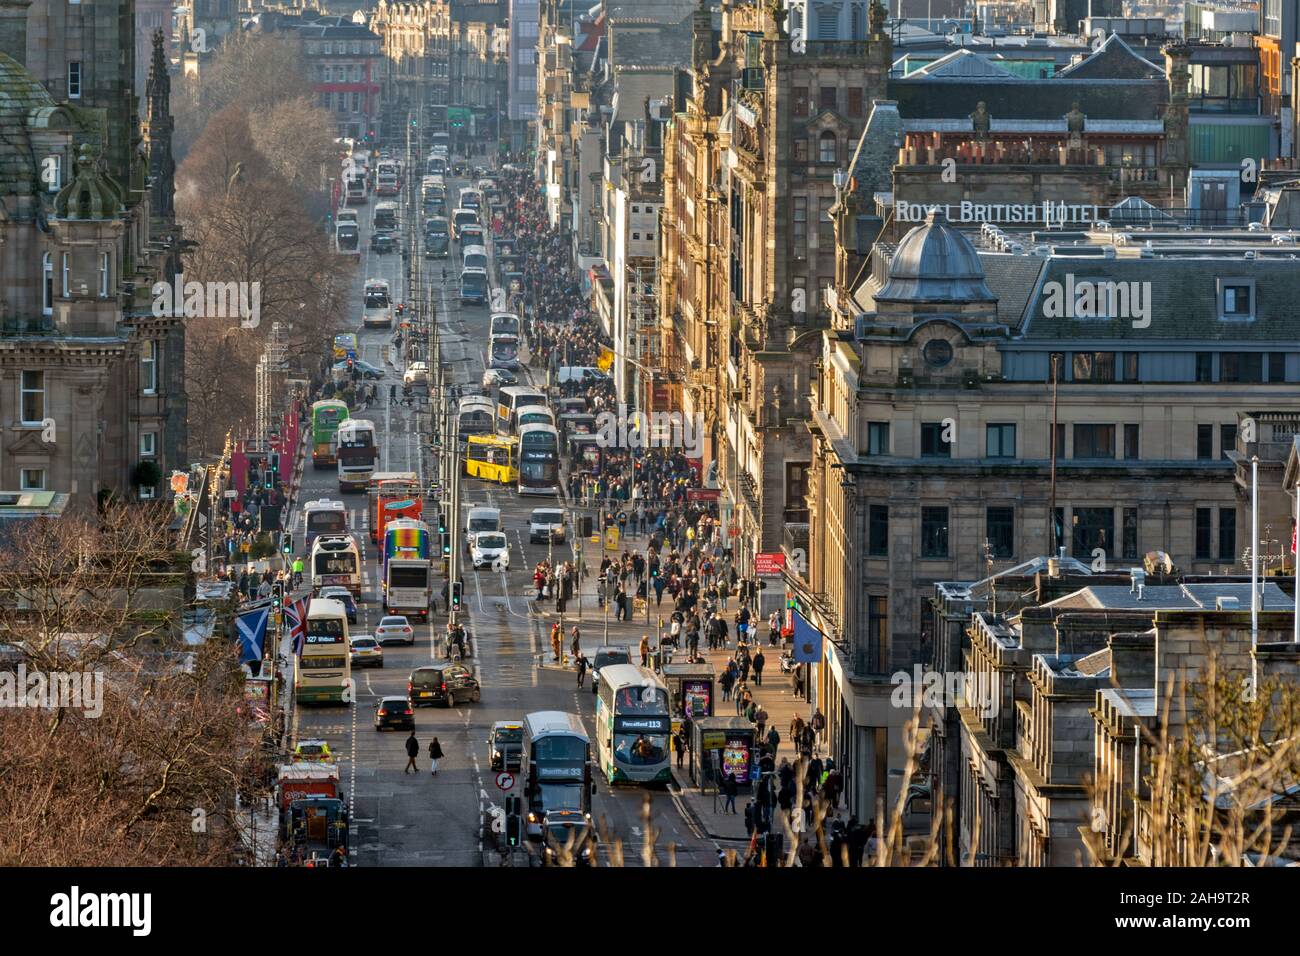 EDINBURGH SCOTLAND WINTER TIME CITY VIEW PRINCES STREET WITH CROWDS ON THE PAVEMENT AND MANY CARS AND BUSES ON THE ROAD Stock Photo